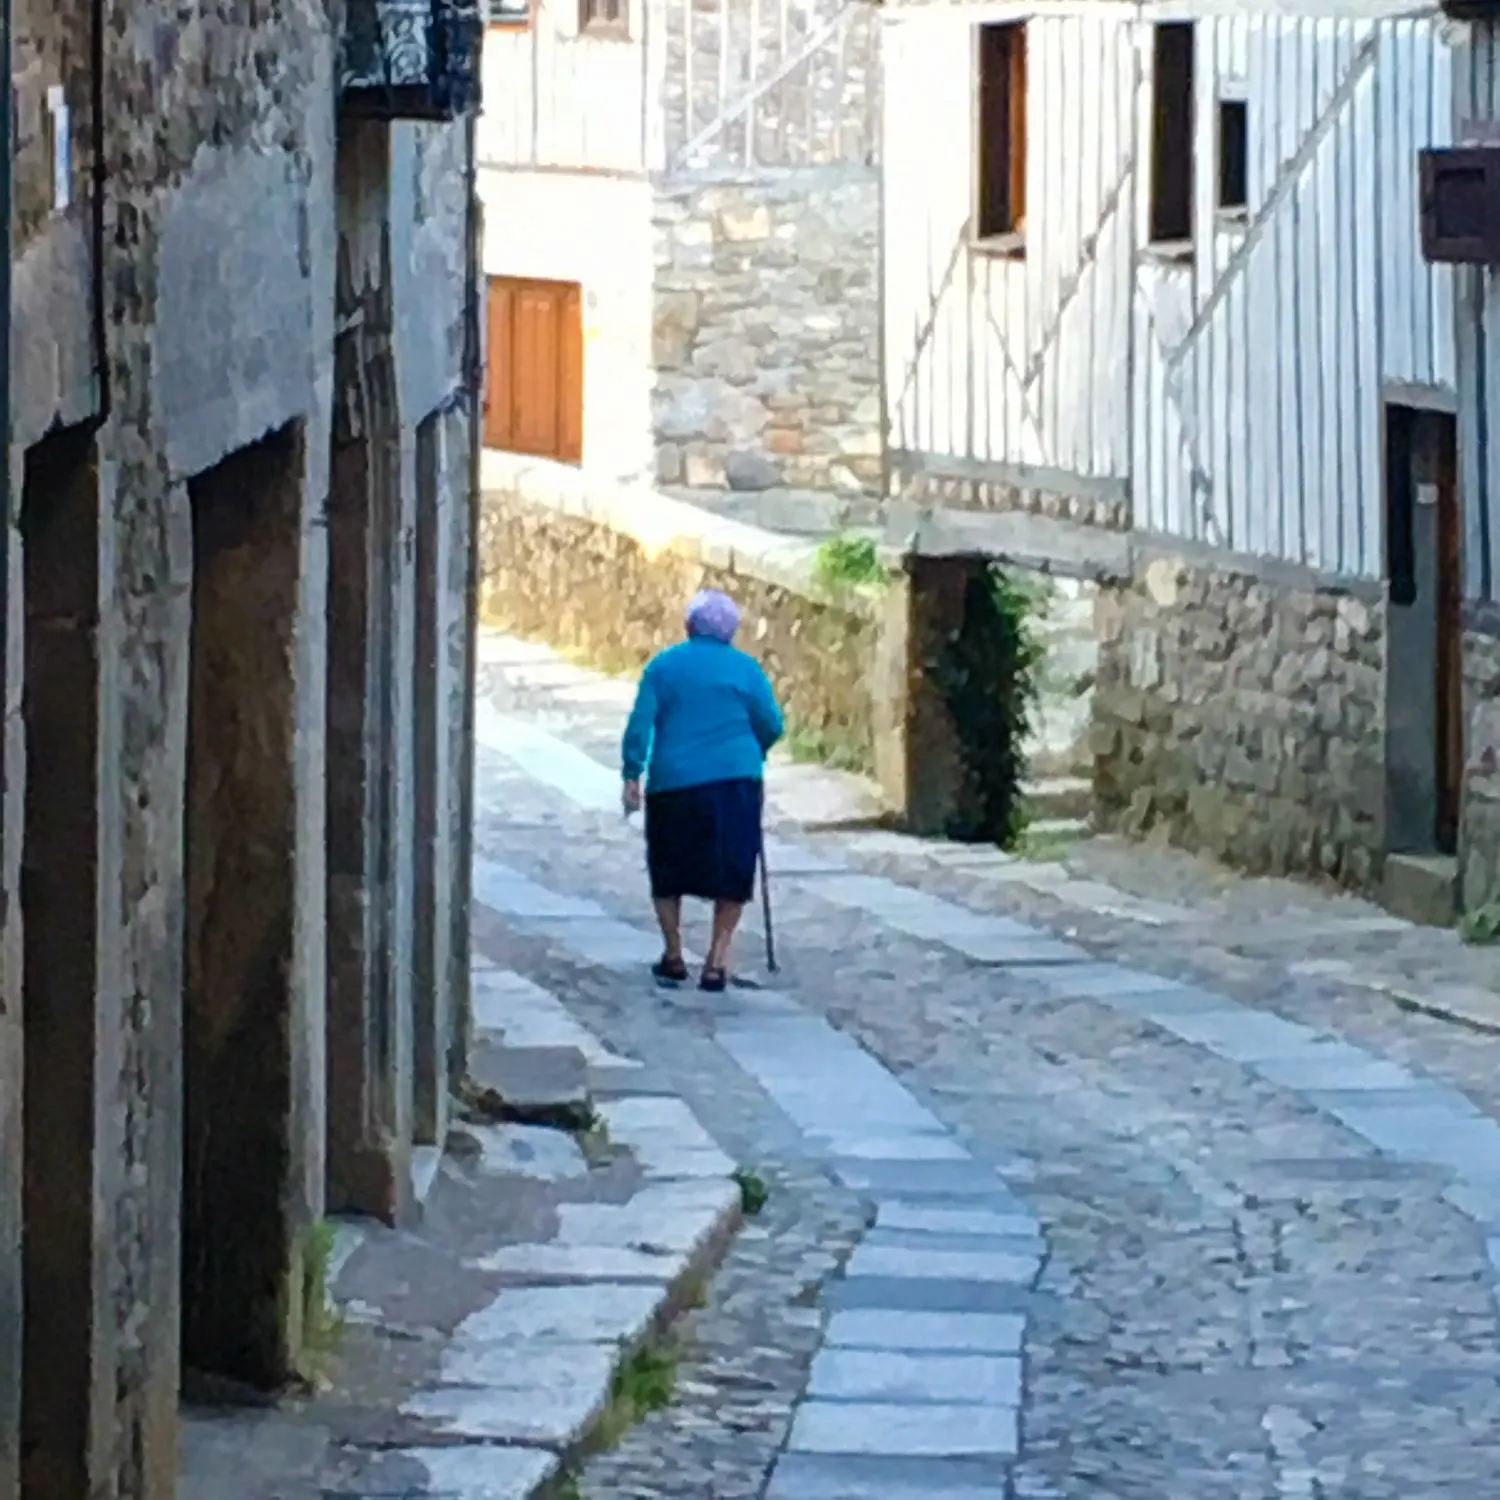 Rita from "Supermercado Rita" in La Alberca. One of the many villagers seen walking early.